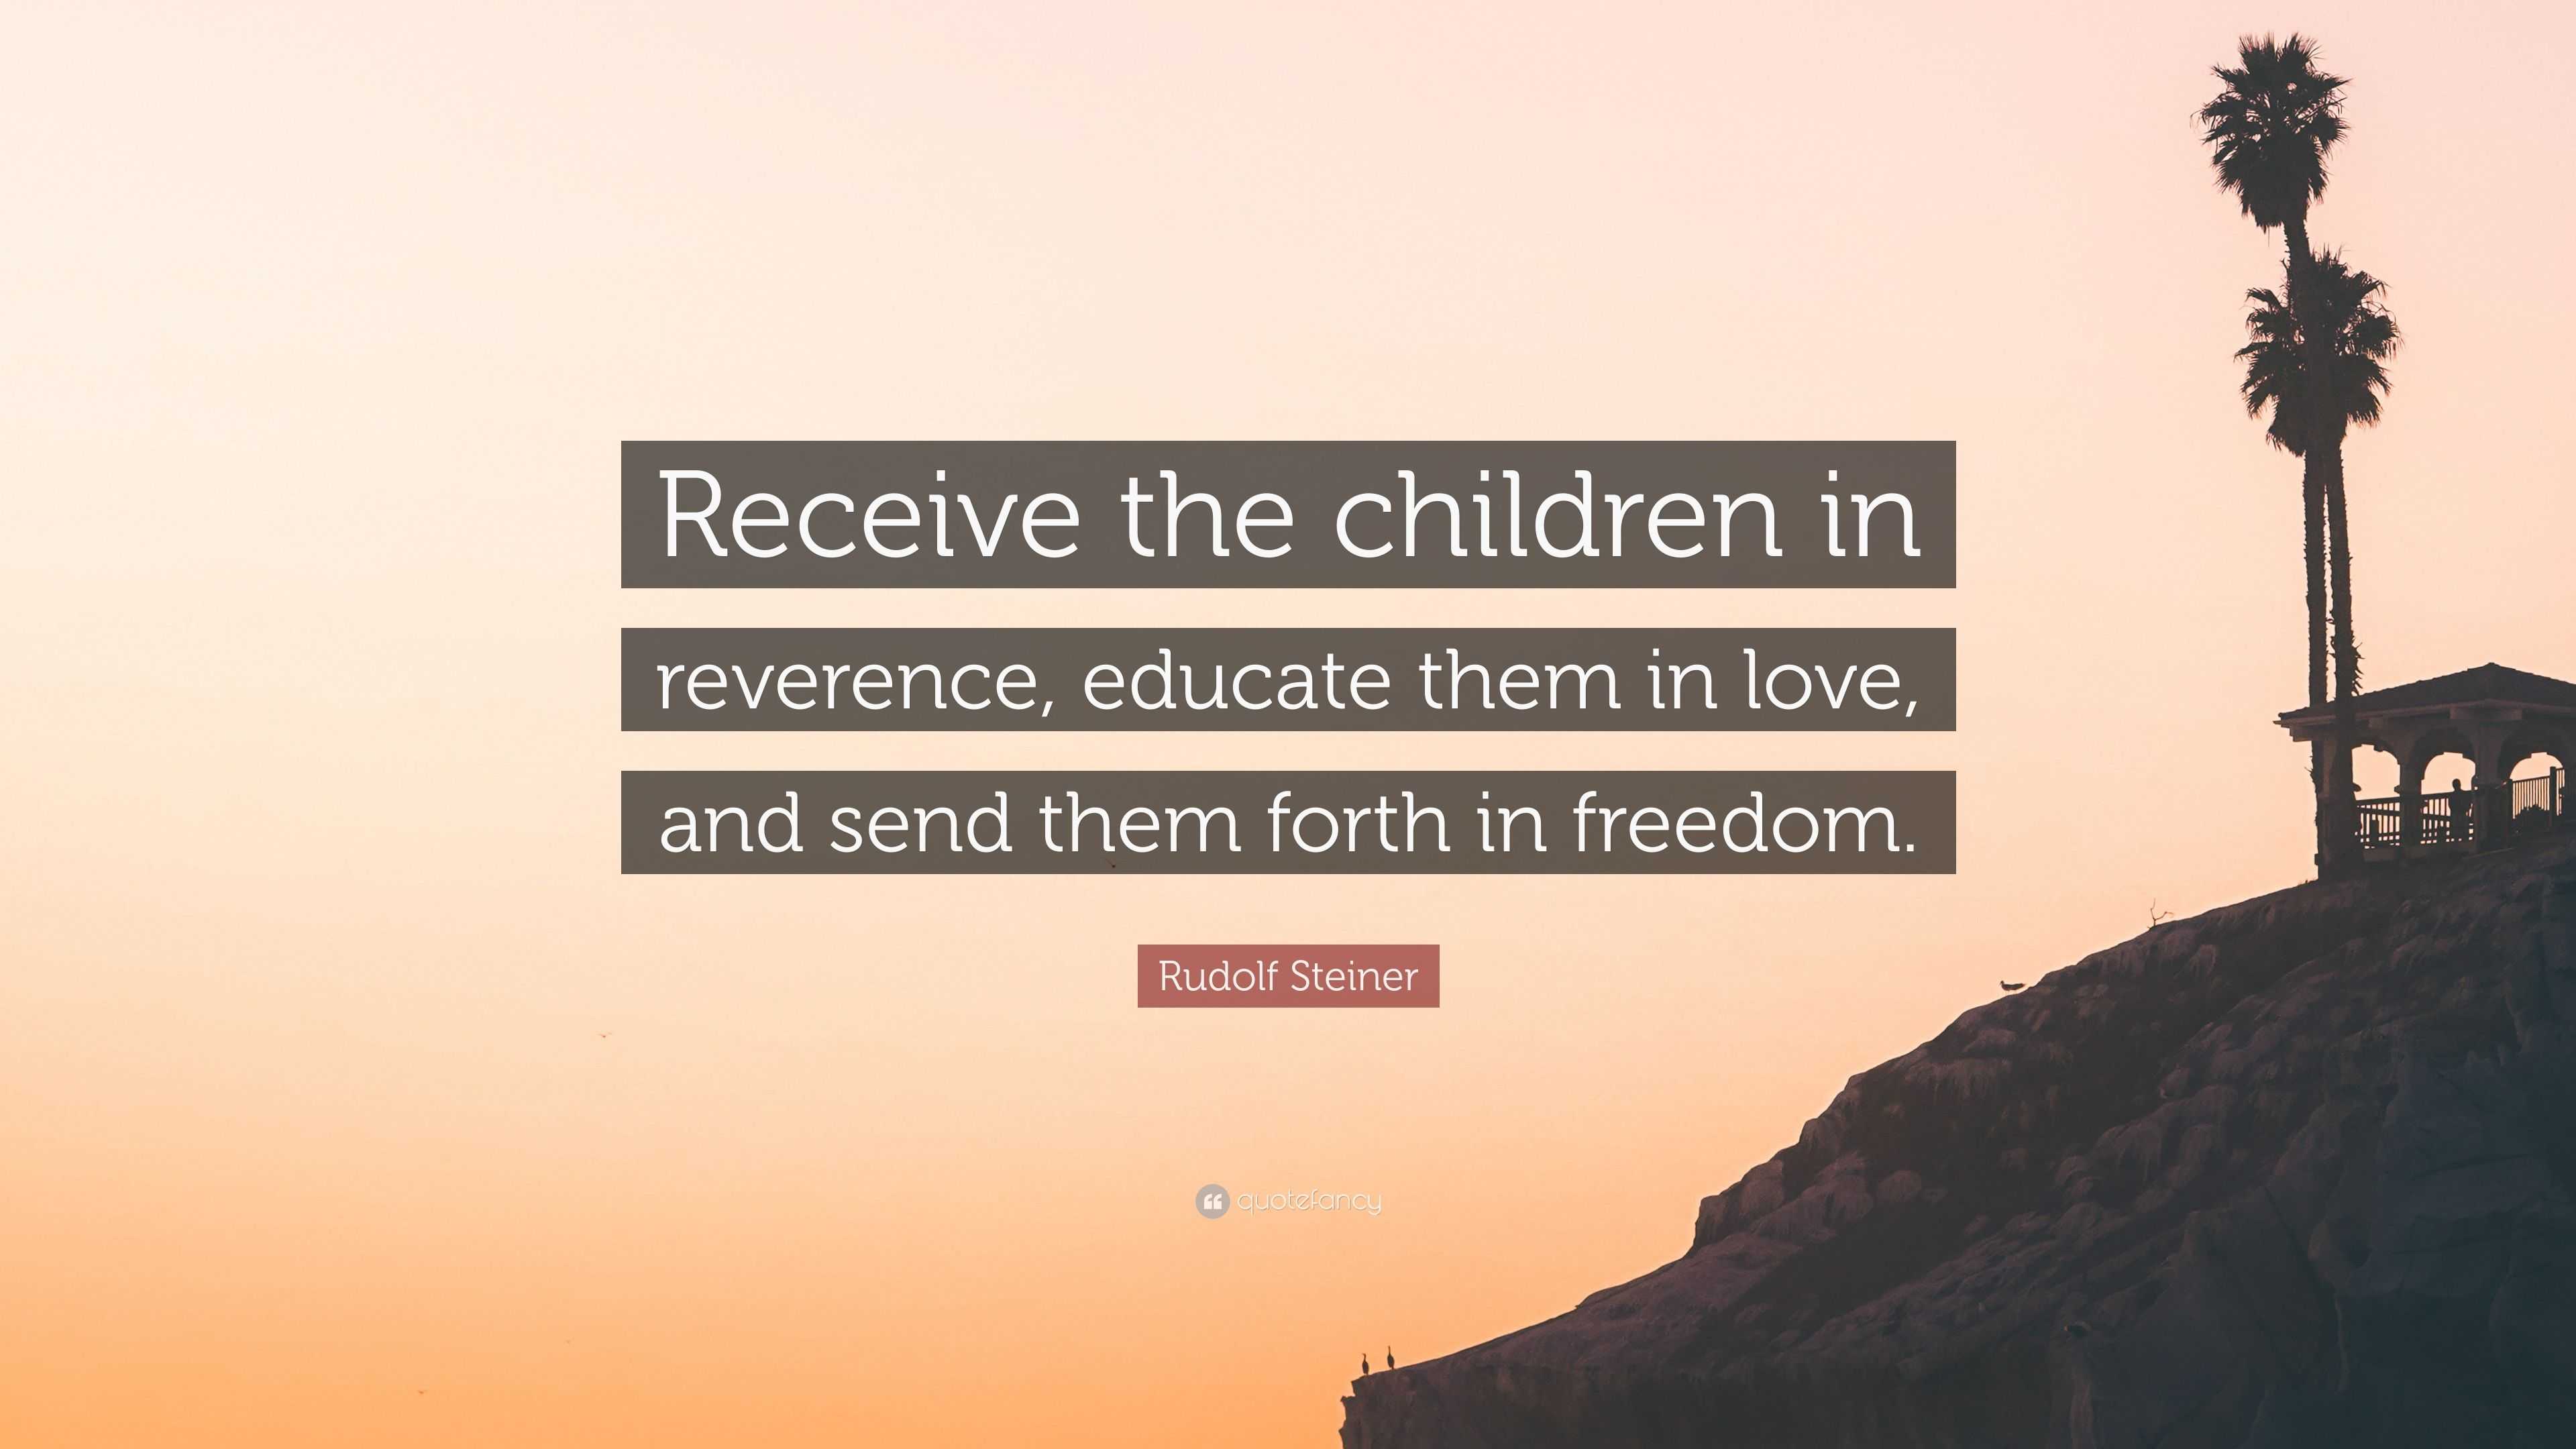 4710994 Rudolf Steiner Quote Receive the children in reverence educate